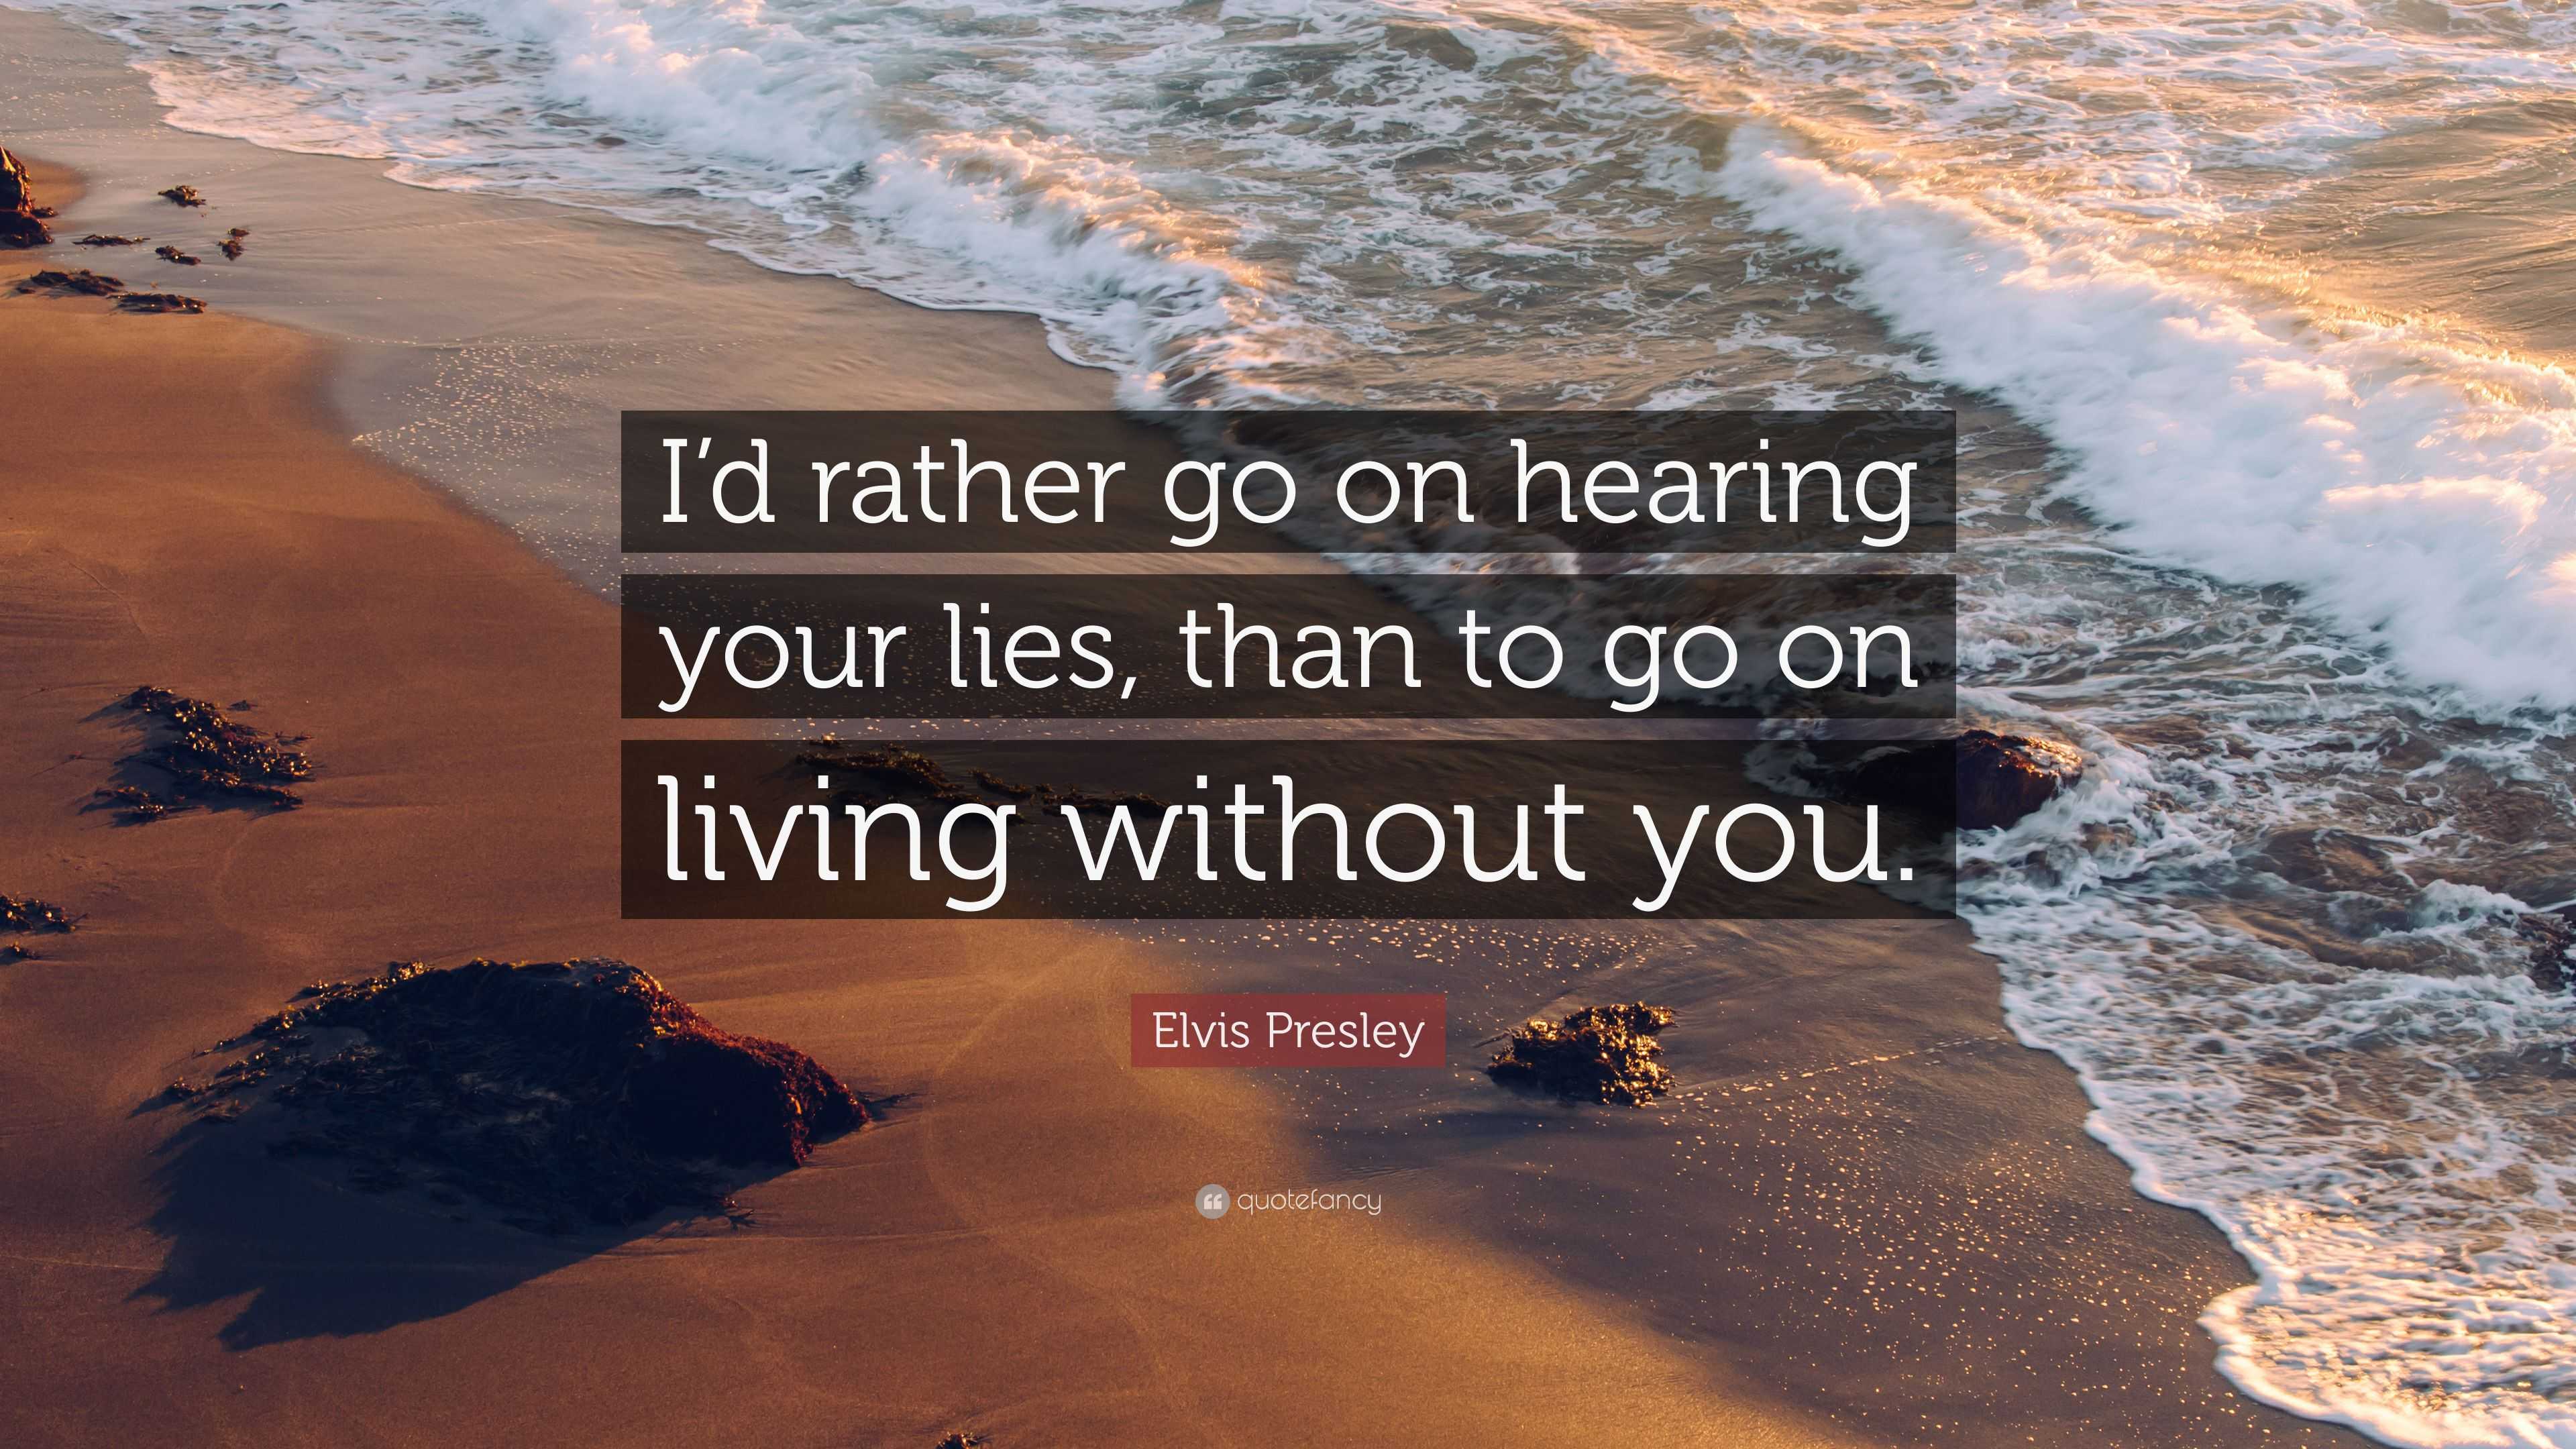 Elvis Presley Quote: “I’d rather go on hearing your lies, than to go on ...